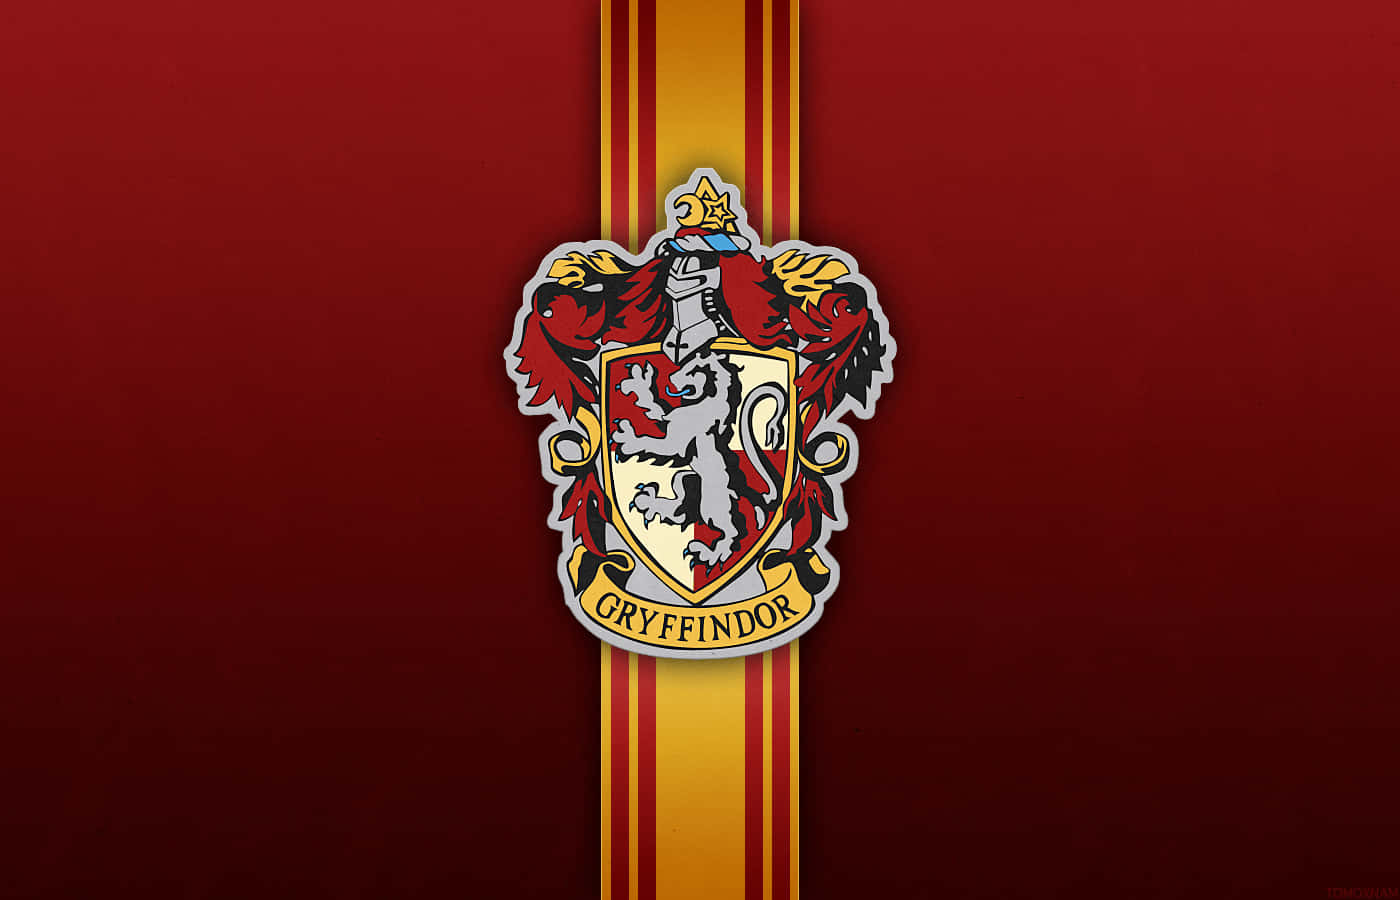 30+ Free Gryffindor Wallpaper Options For Your Phone | Harry potter  background, Harry potter wallpaper, Harry potter wallpaper phone